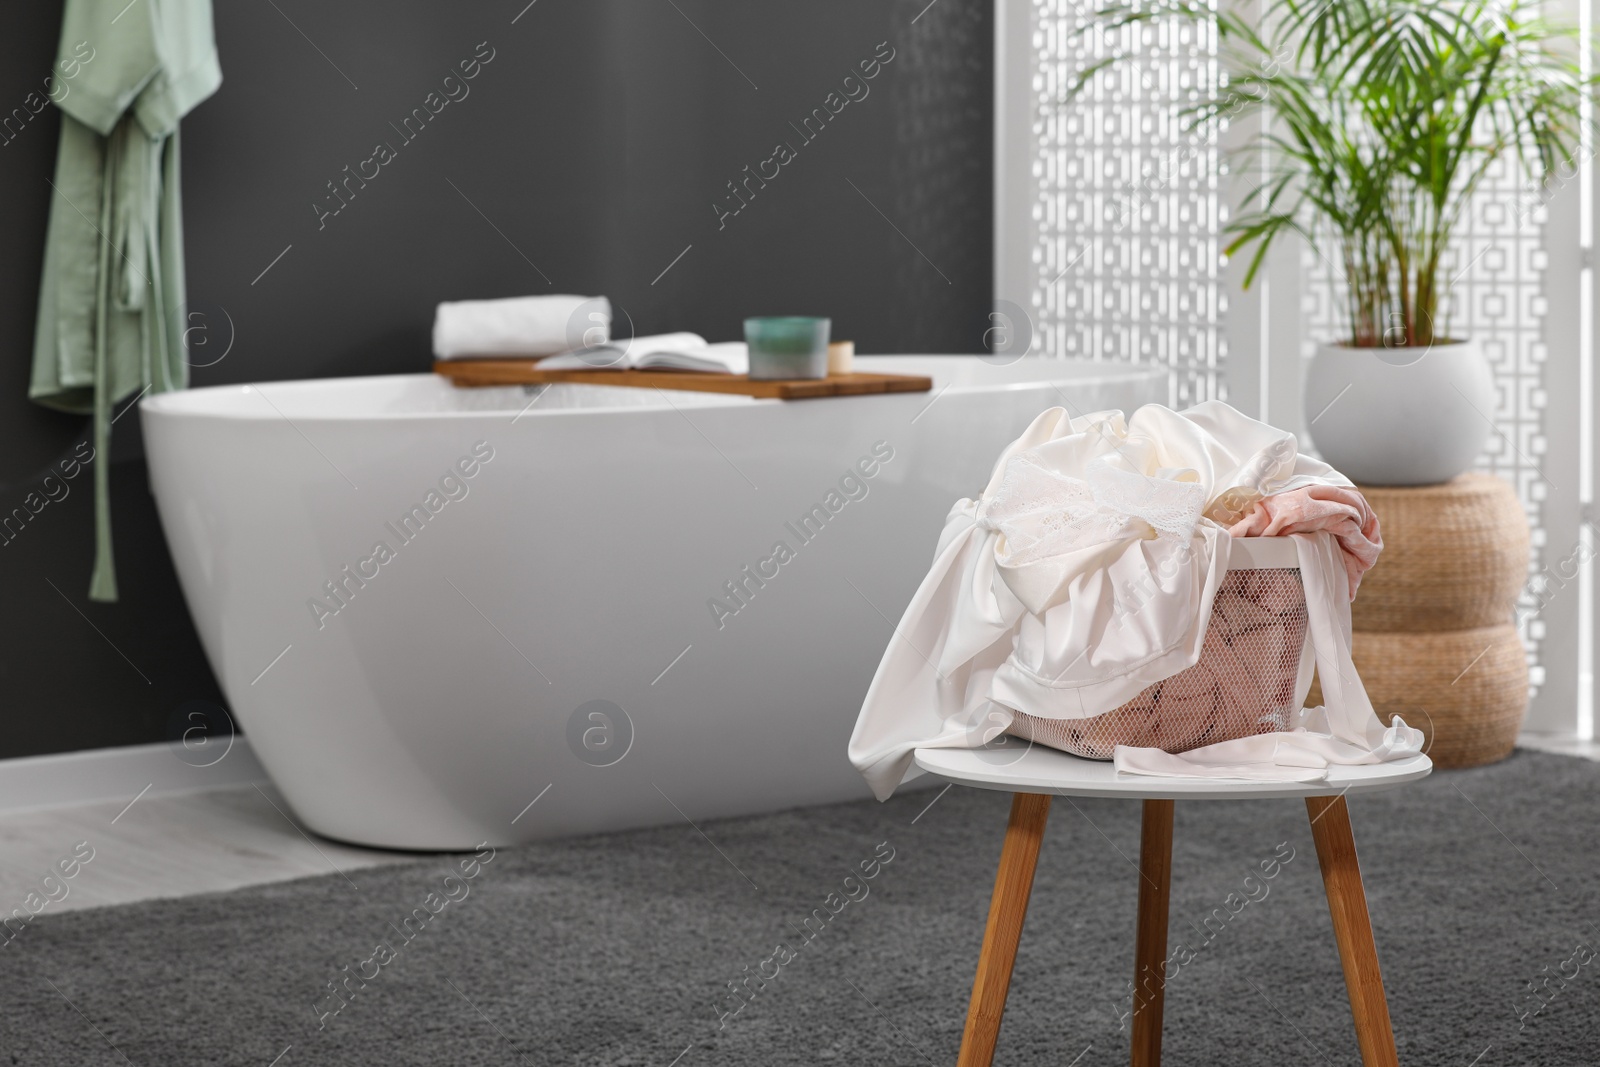 Photo of Laundry basket filled with clothes on table in bathroom. Space for text